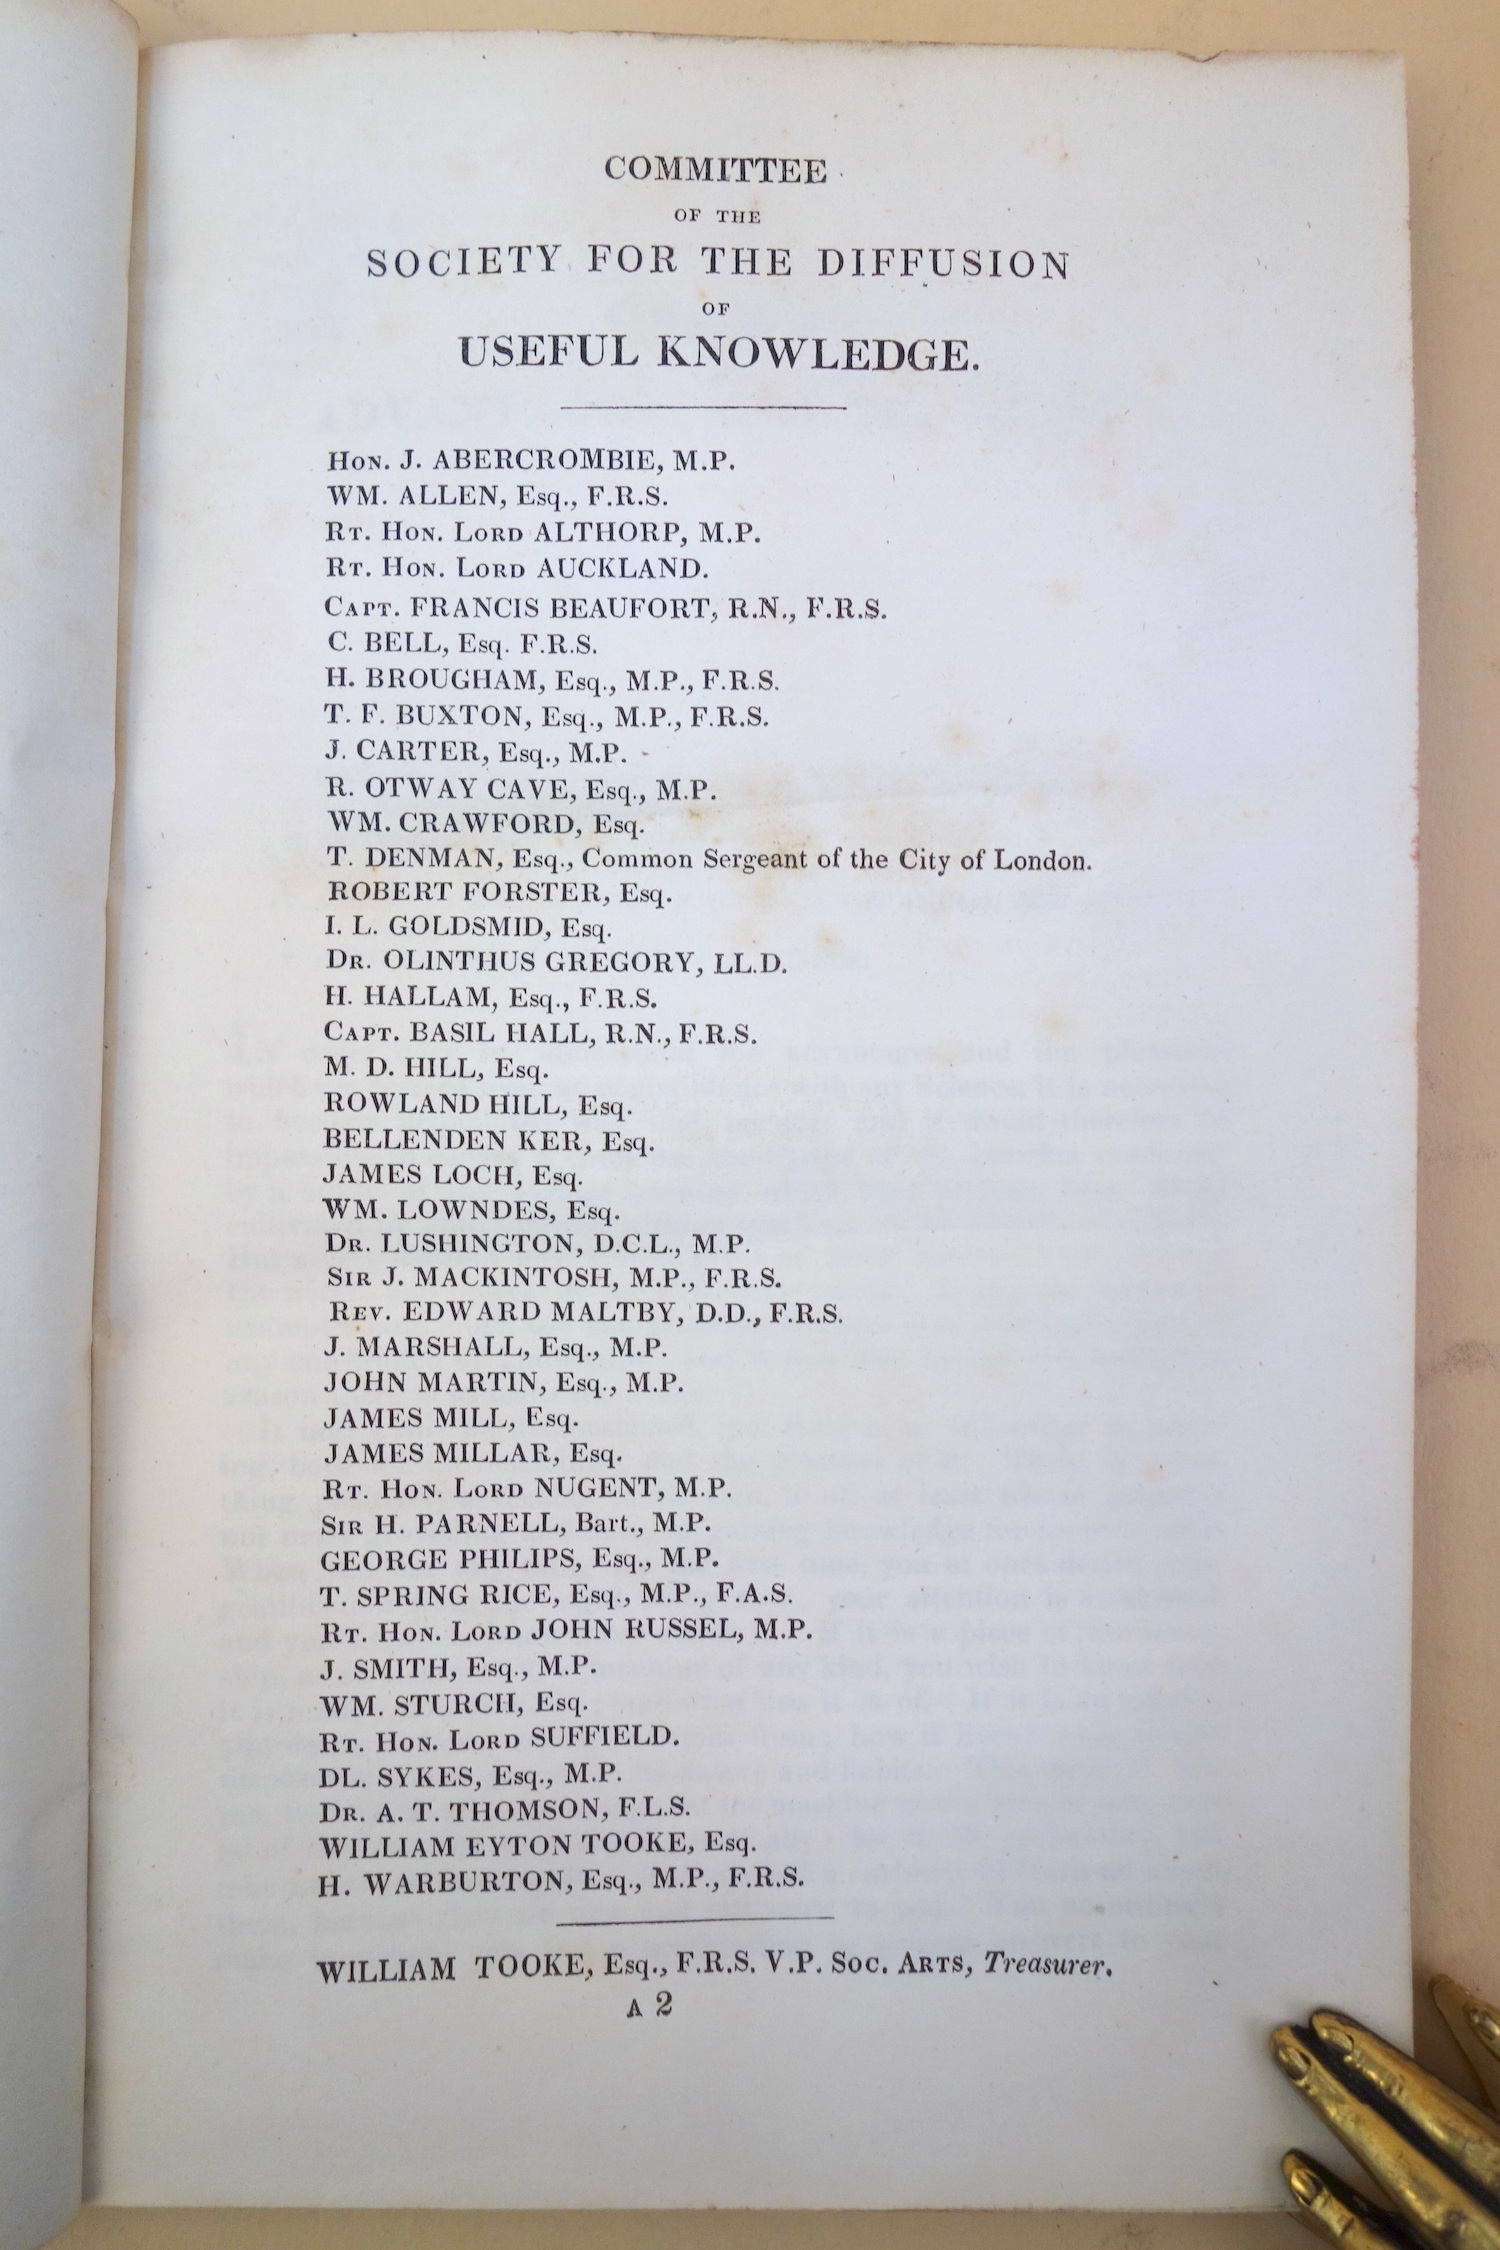 Listing of the people who founded the SDUK